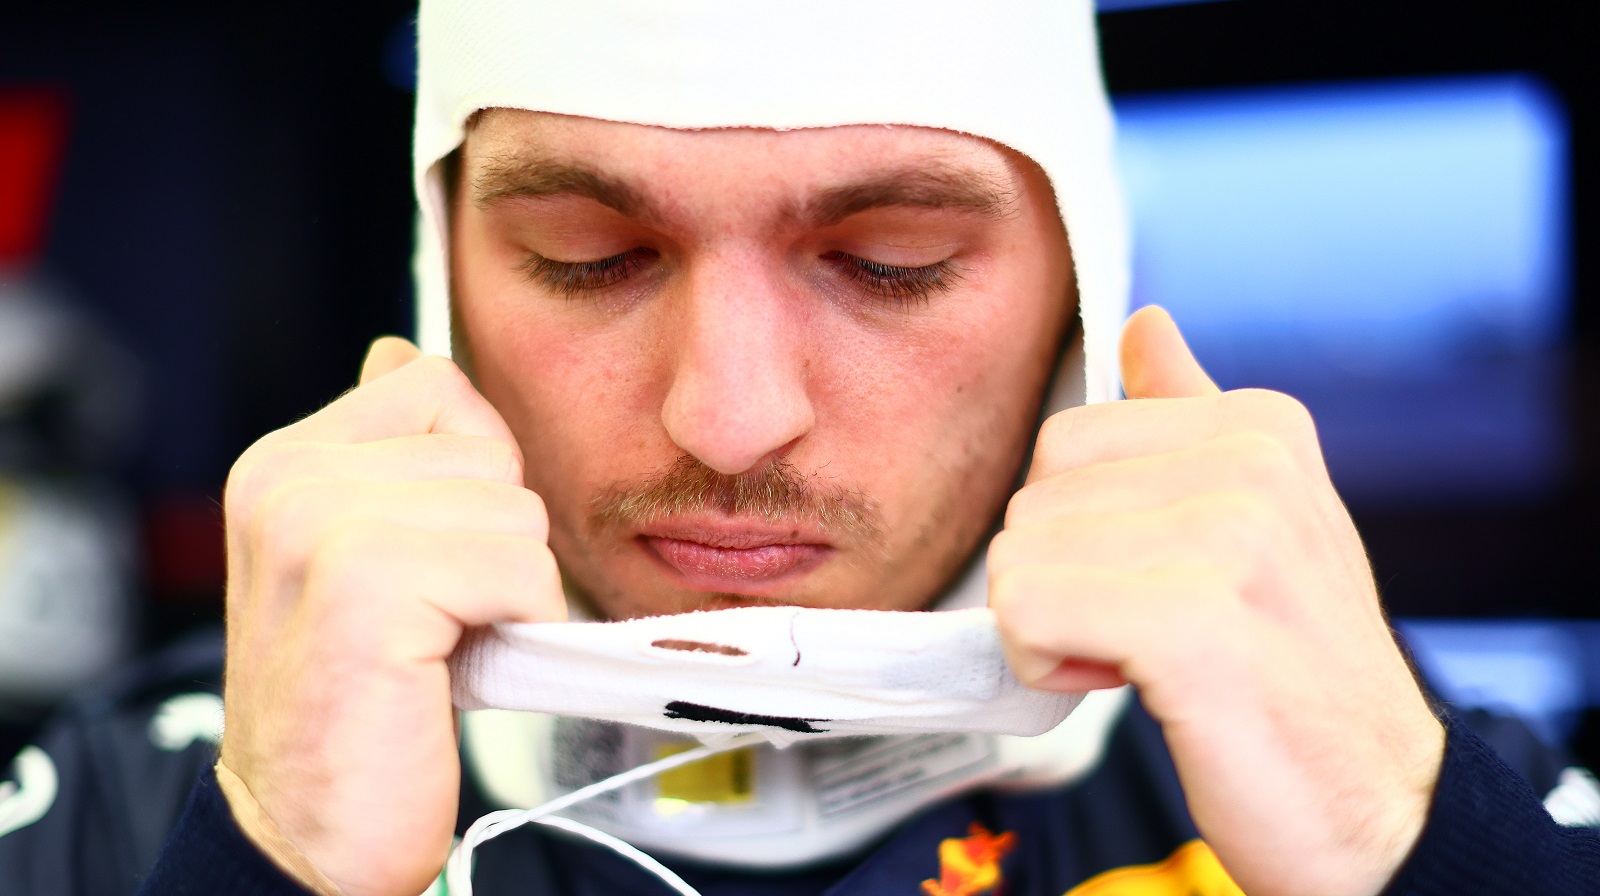 Max Verstappen of Oracle Red Bull Racing prepares to drive in the garage before the F1 Grand Prix of Bahrain at Bahrain International Circuit on March 20, 2022.